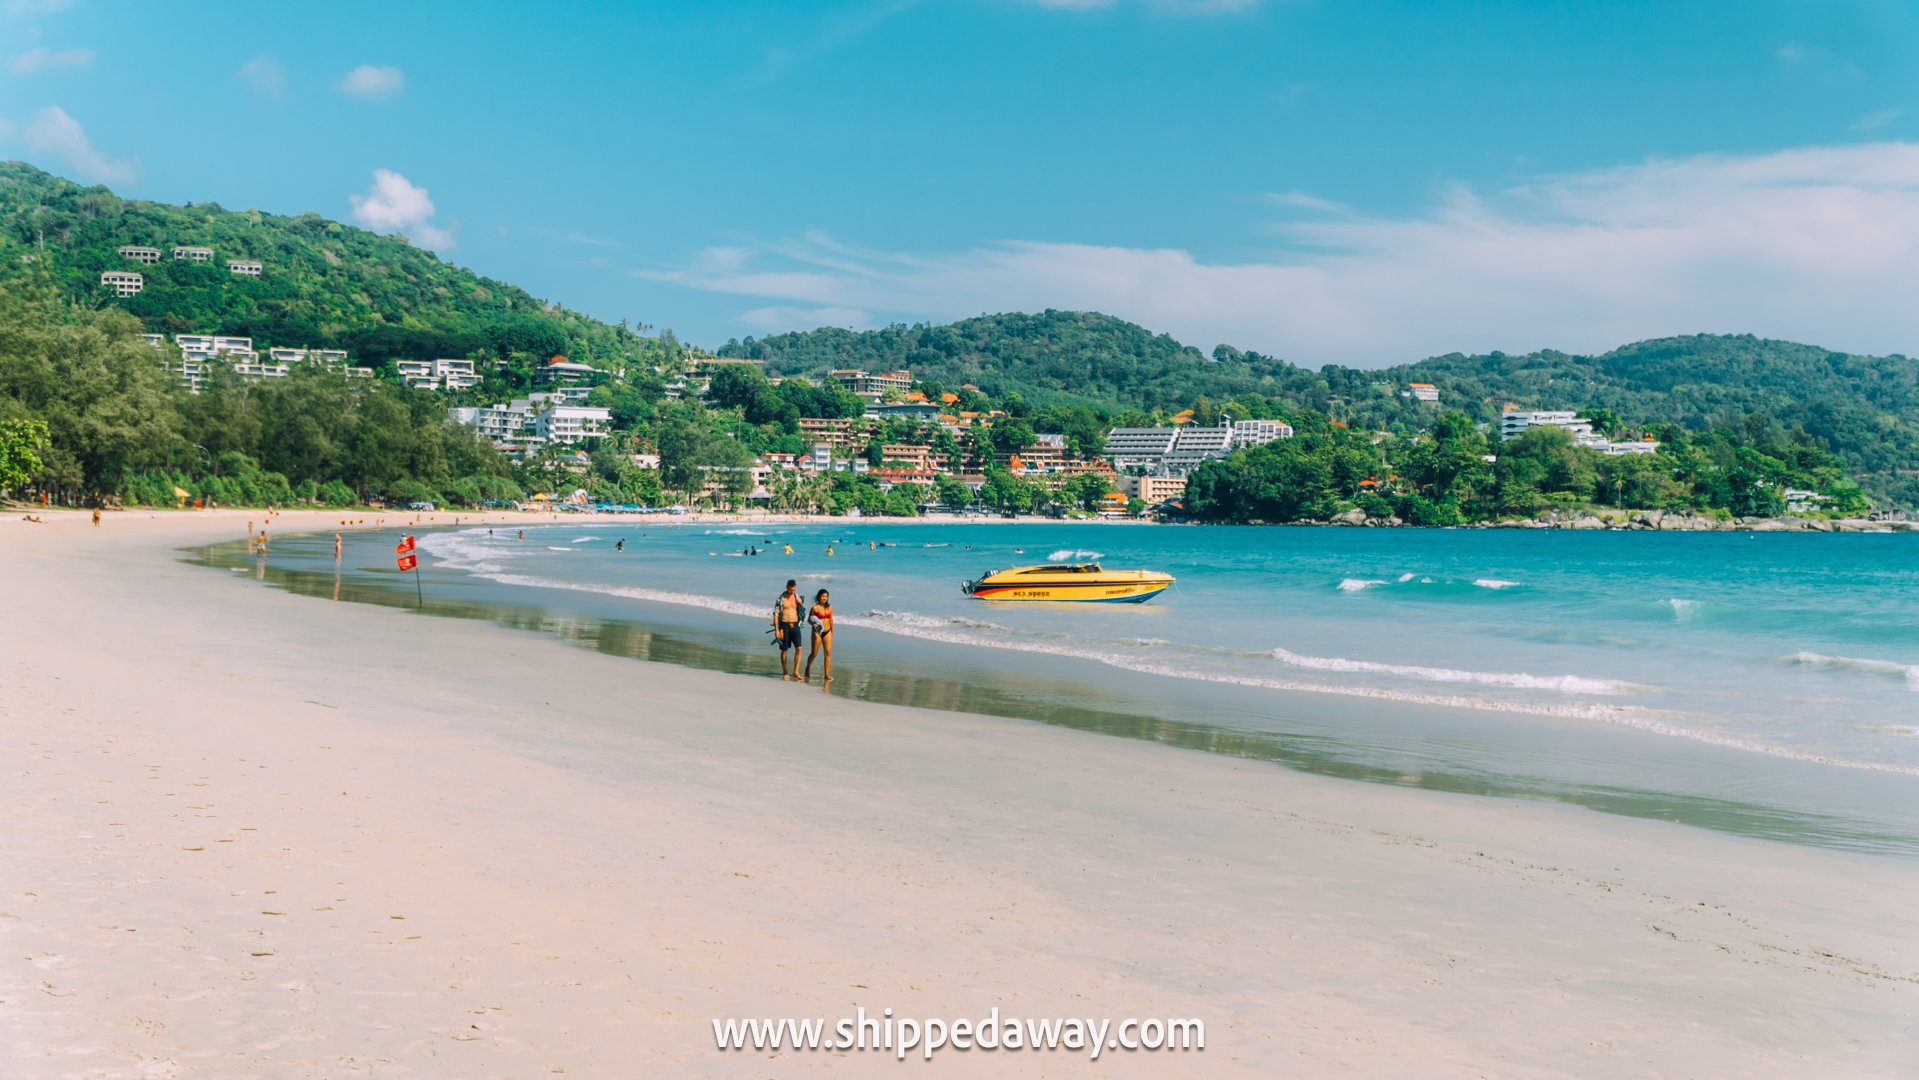 Kata Beach - where to stay in Phuket, best places to stay in Phuket, best areas to stay in Phuket, best Phuket hotels, best hotels in Phuket, best resorts in Phuket, best Phuket resorts, best Phuket hostels, budget stays in Phuket, Phuket budget accommodation, sunny day on the Kata Beach